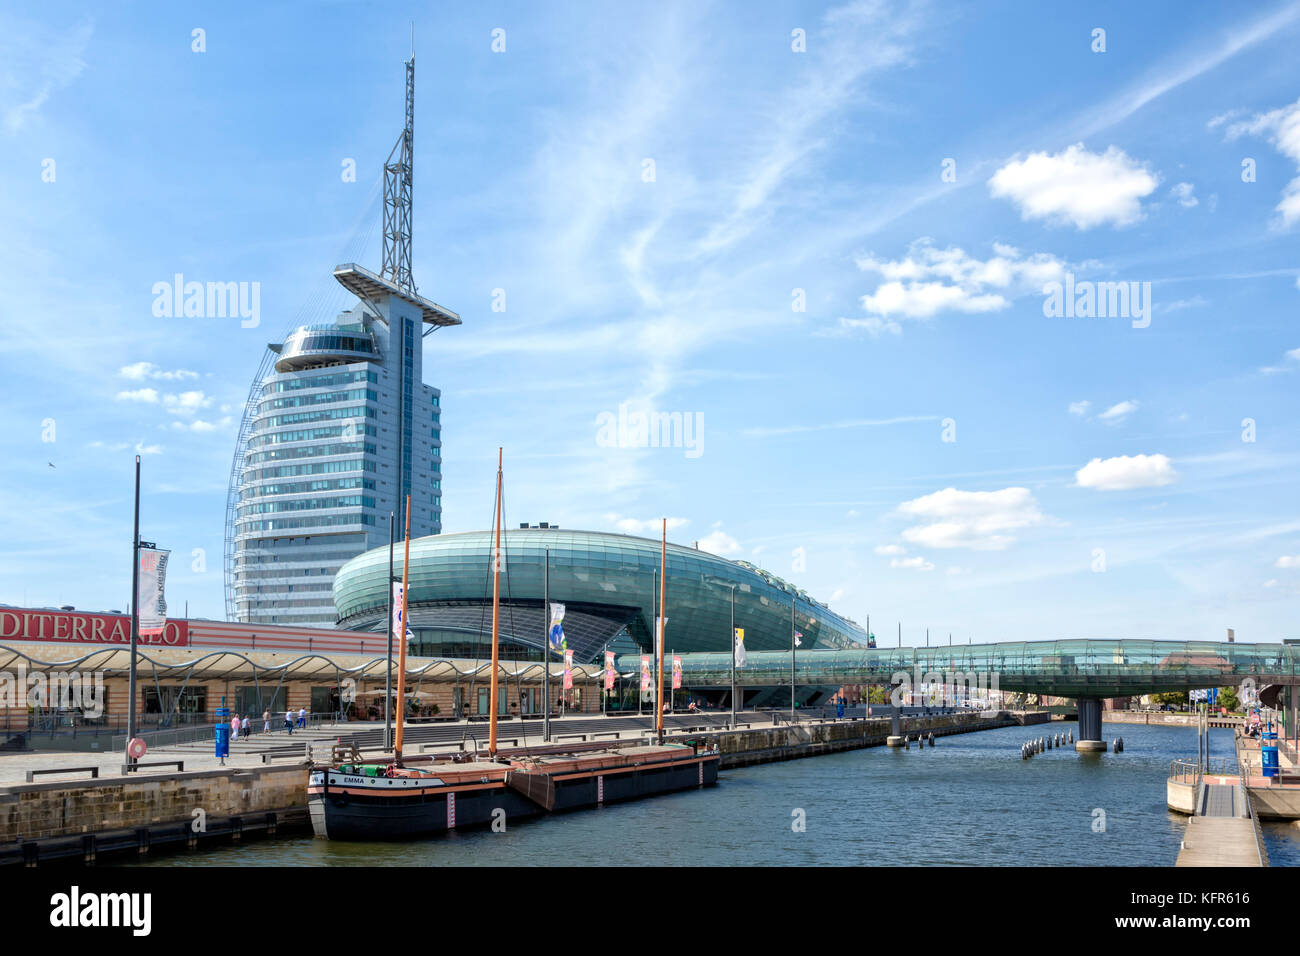 Mediterraneo shopping centre, Atlantic Hotel Sail City and Klimahaus Bremerhaven buildings at Bremerhaven city center, Bremen, Germany Stock Photo